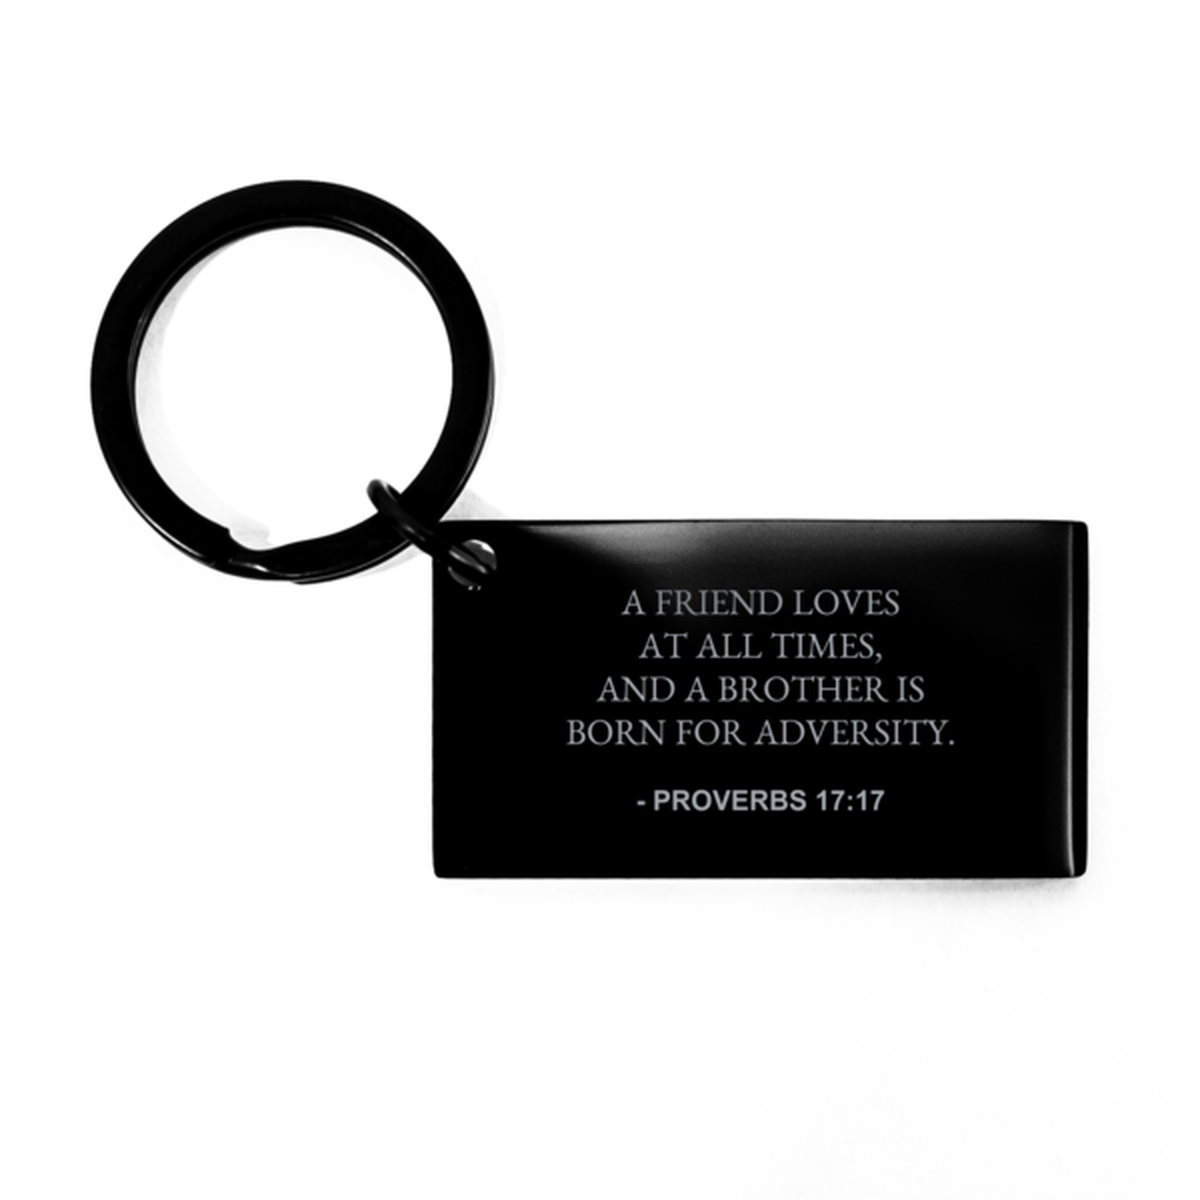 Bible Verse Black Keychain, Proverbs 17:17 A Friend Loves At All Times And A Brother Is, Christian Inspirational Key Ring Gifts For Men Women